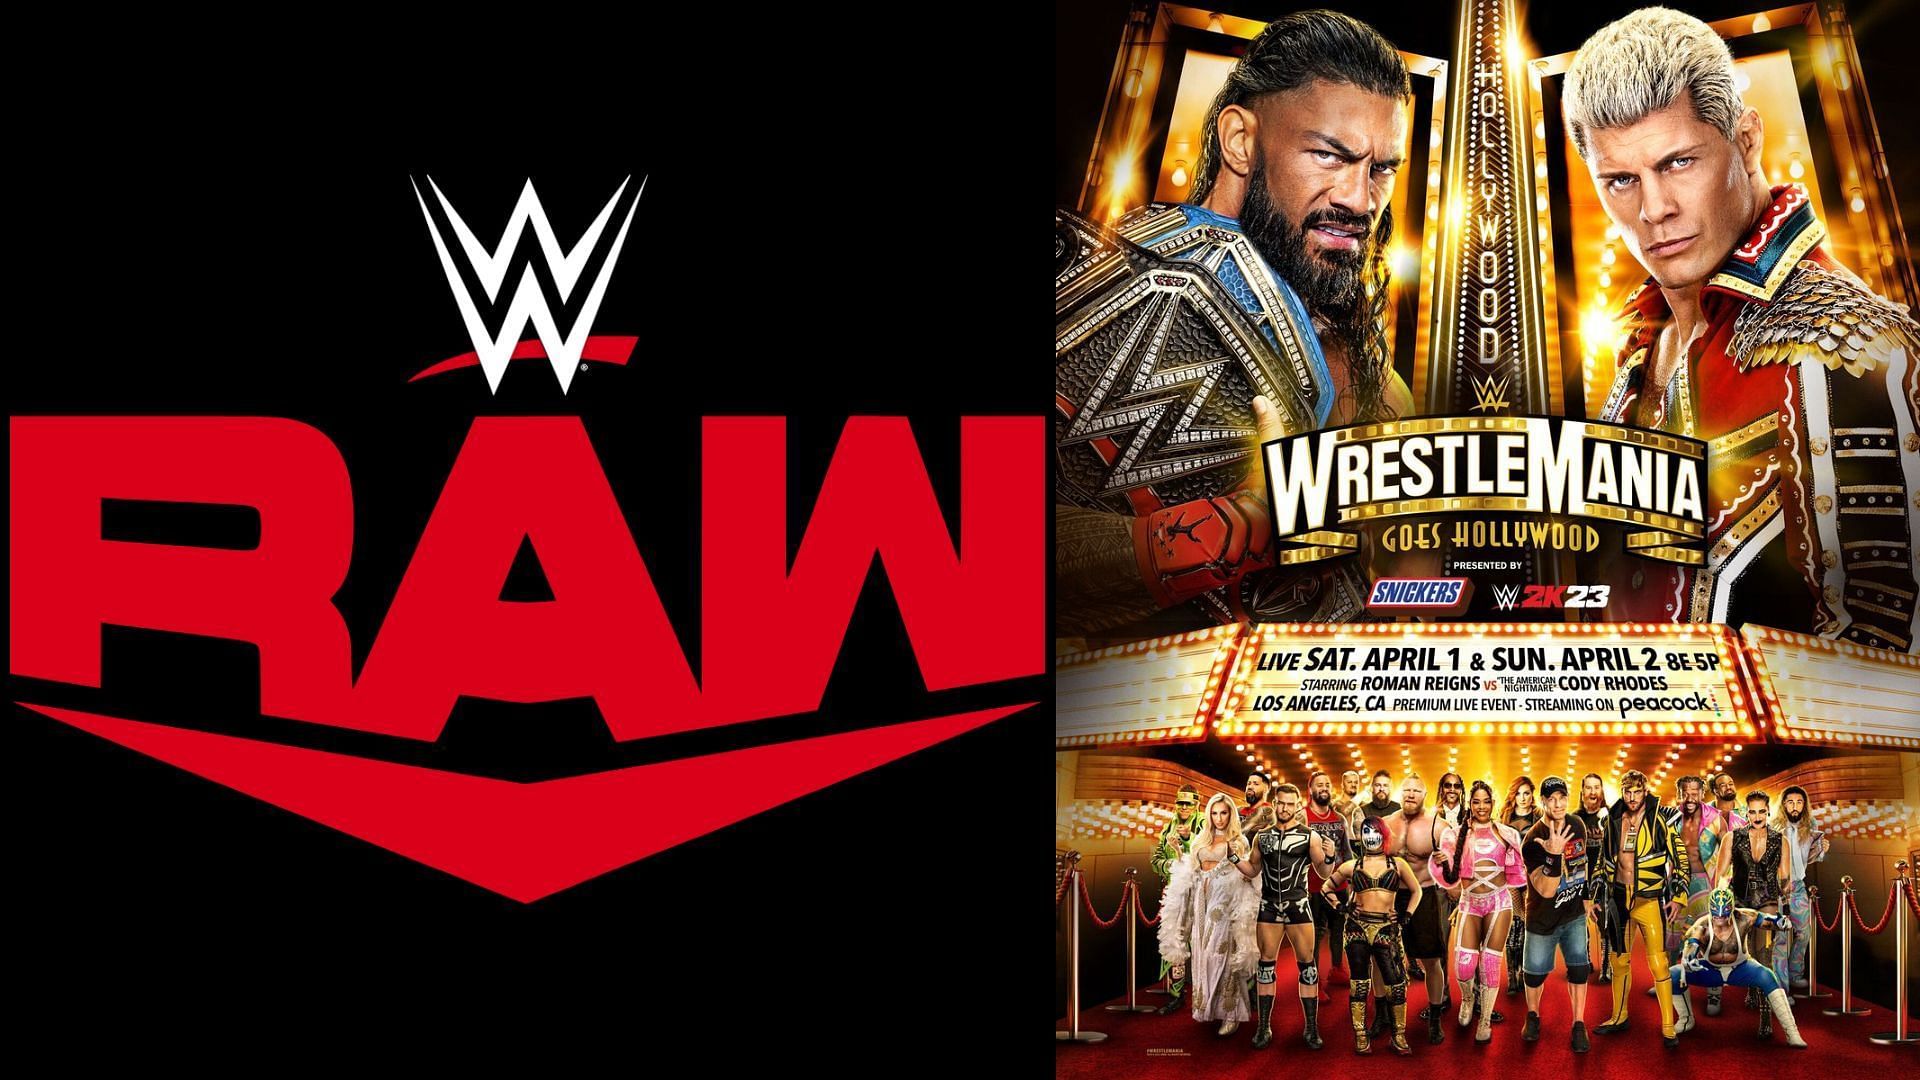 WWE RAW after WrestleMania 39 is set to take place in Downtown, Los Angeles.